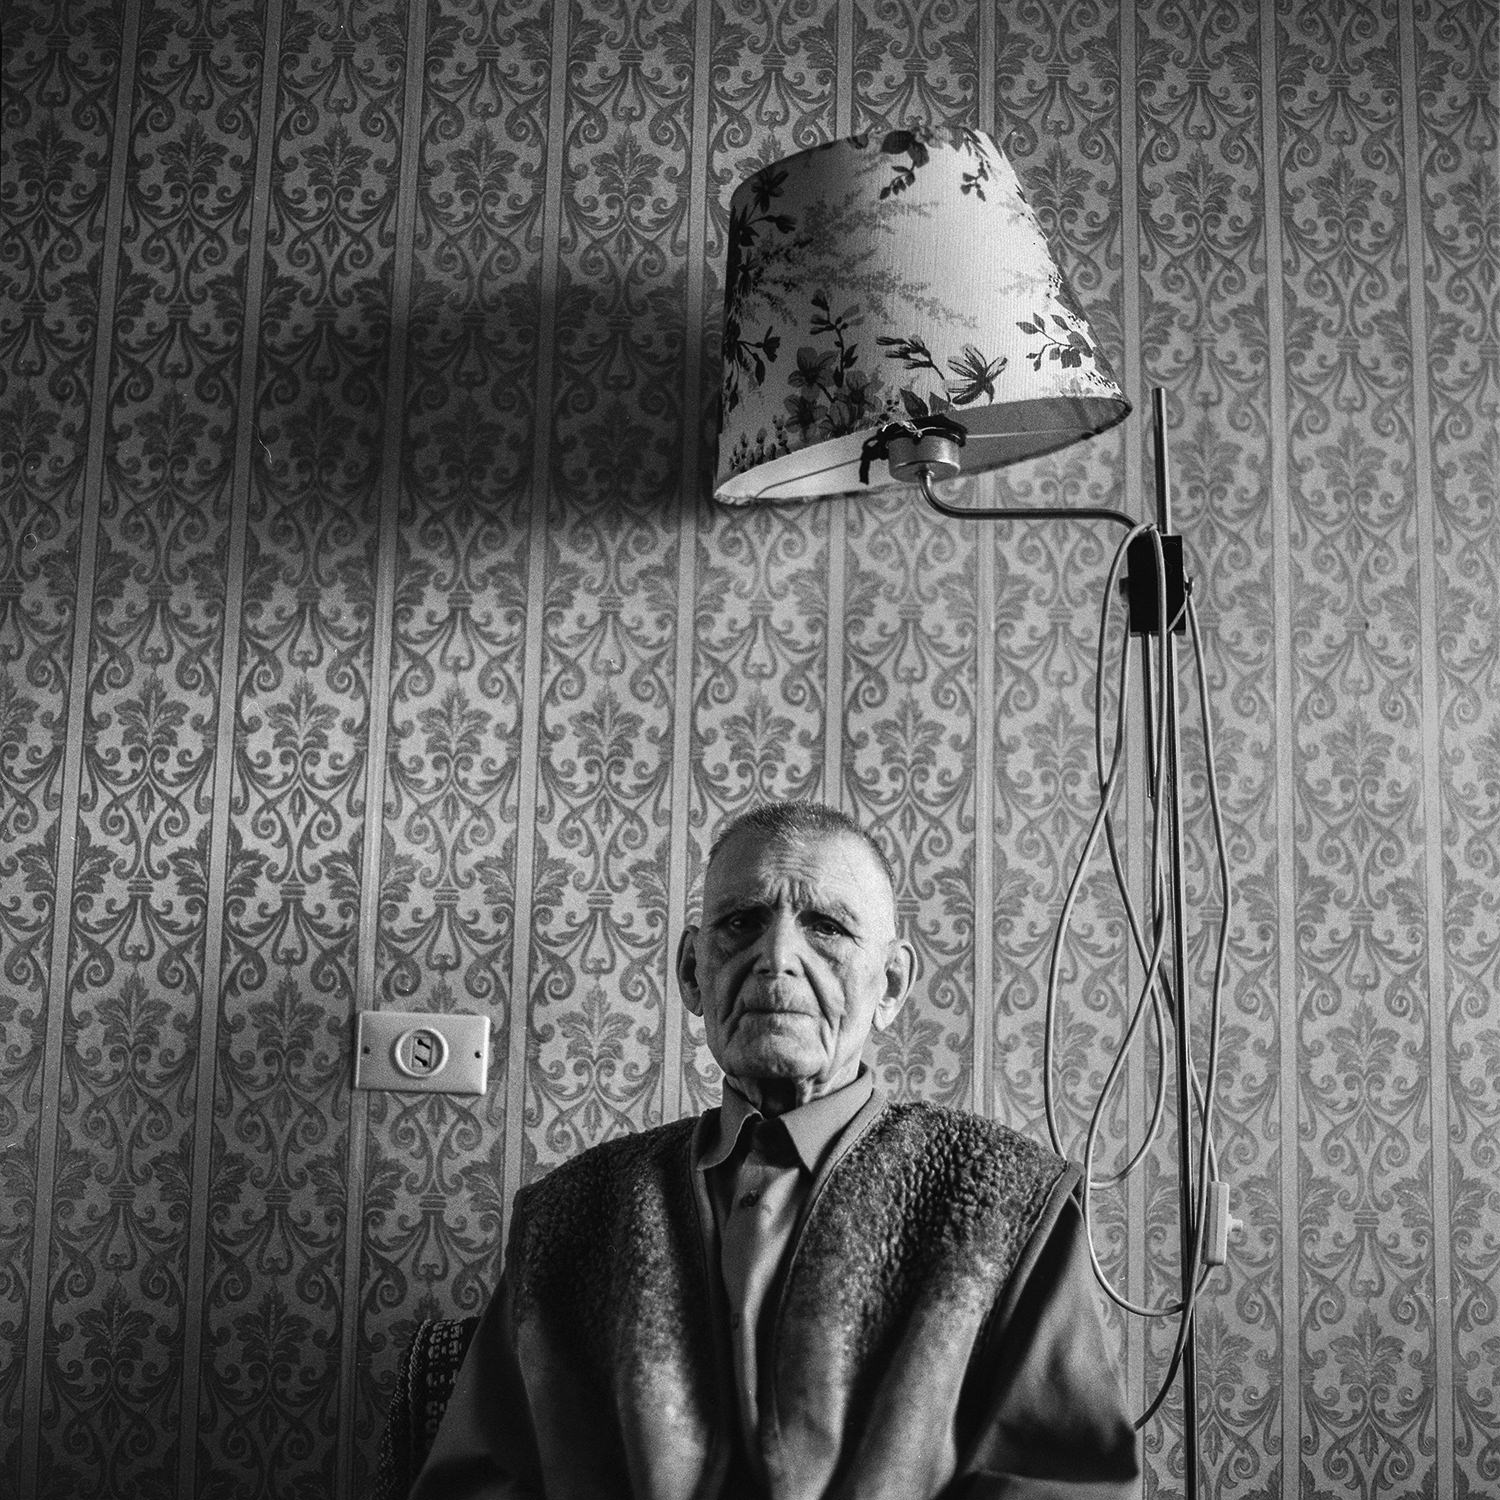 A lonely old soldier of Great Patriotic War sits in a chair under a floor lamp in warm clothes in his apartment